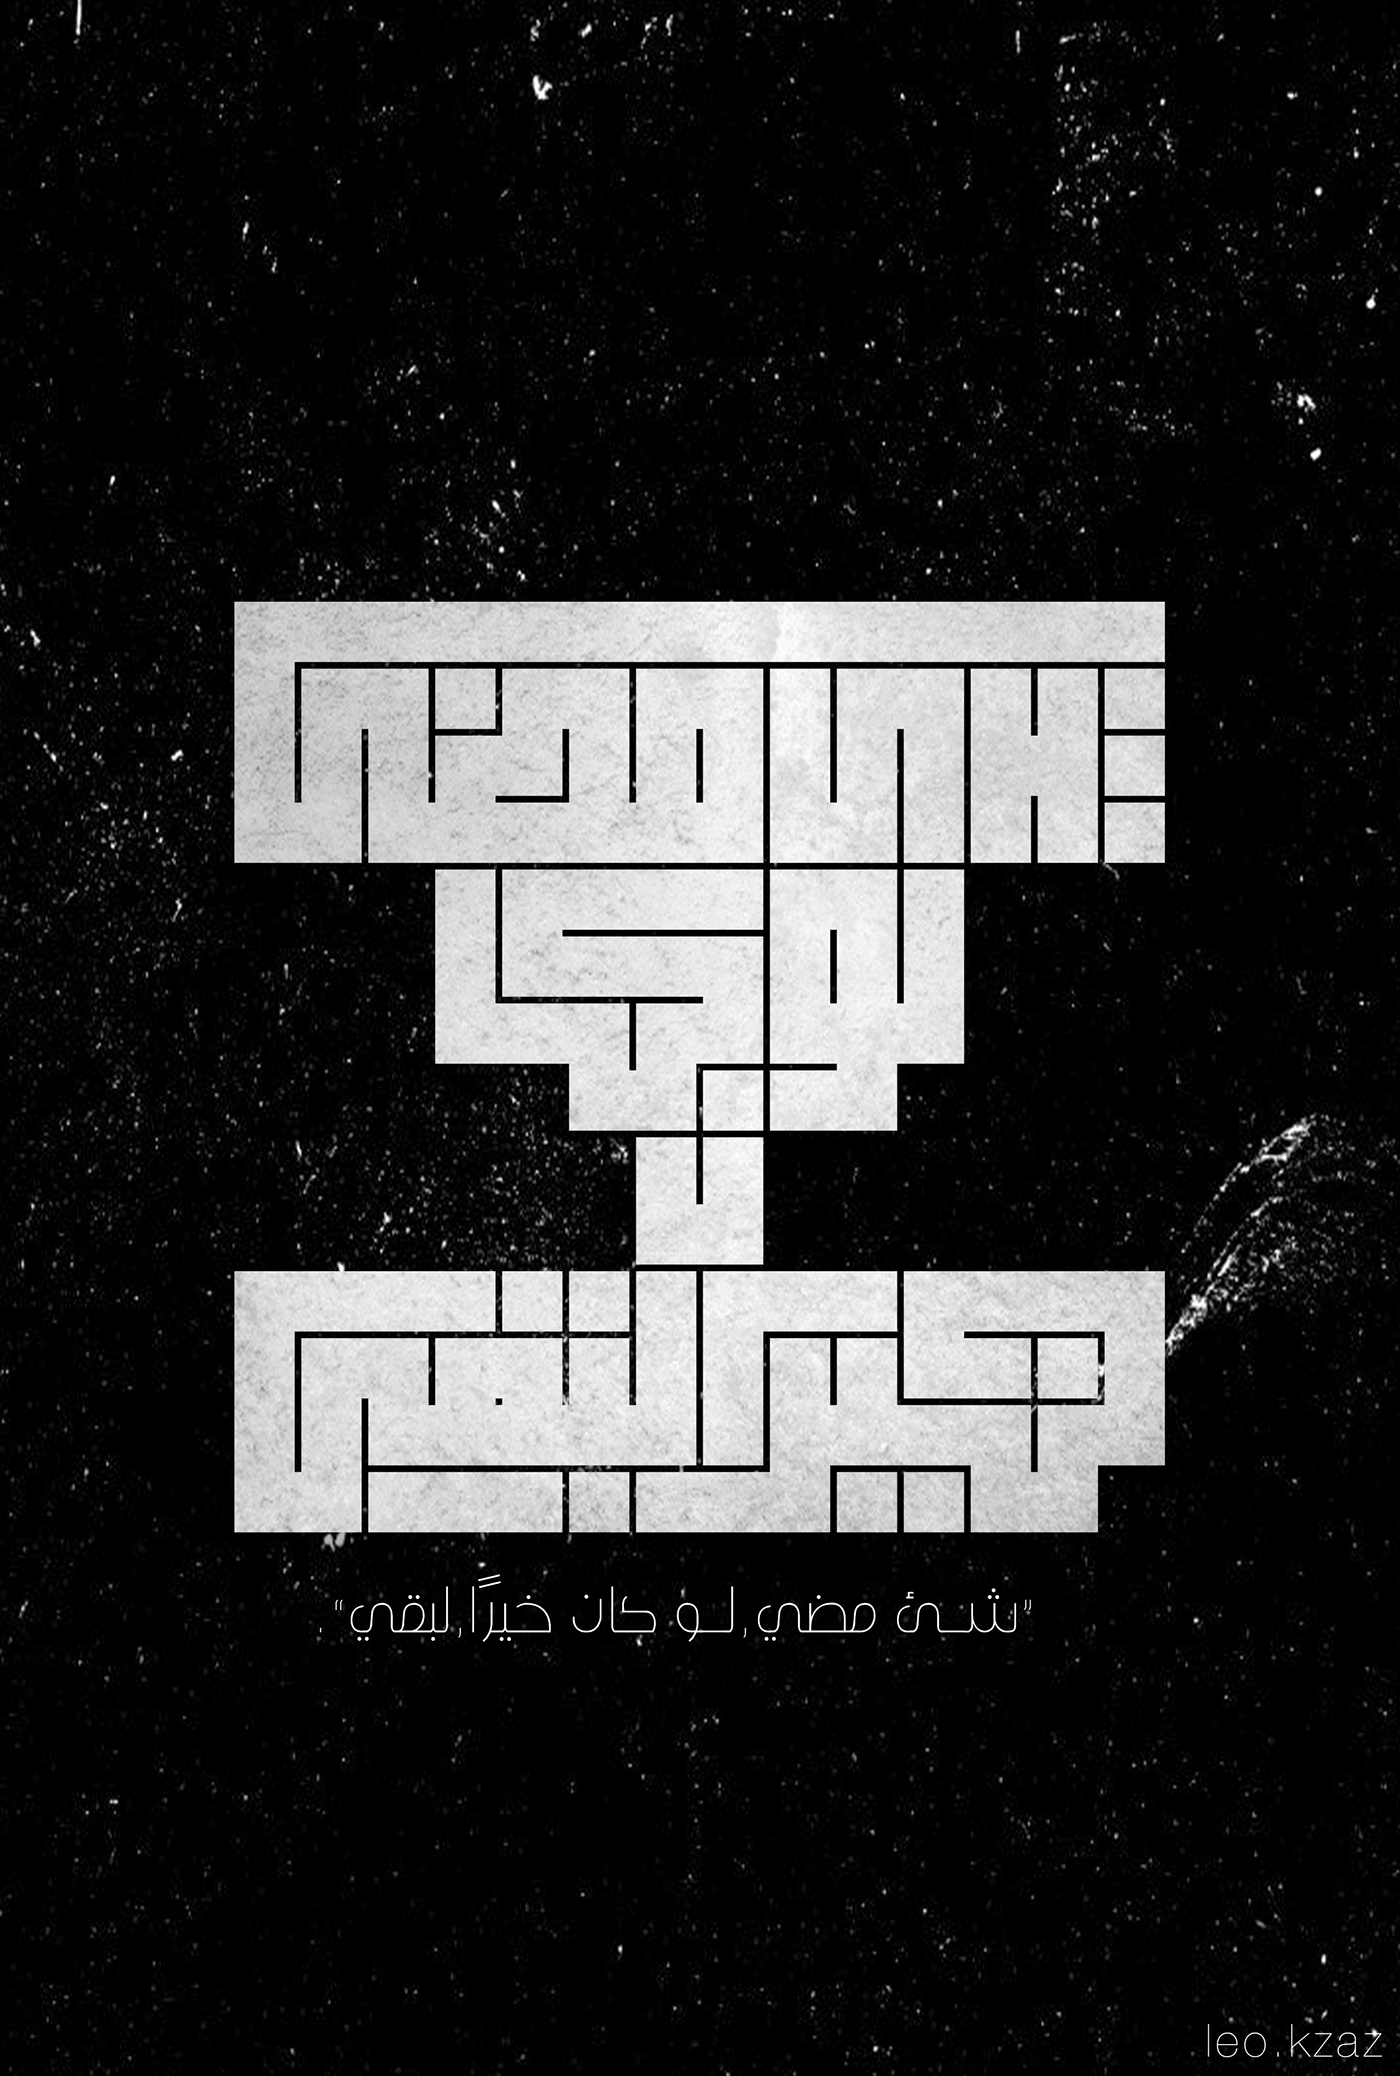 typo arabic quote Calligraphy   time passed thing b&w graphic design 